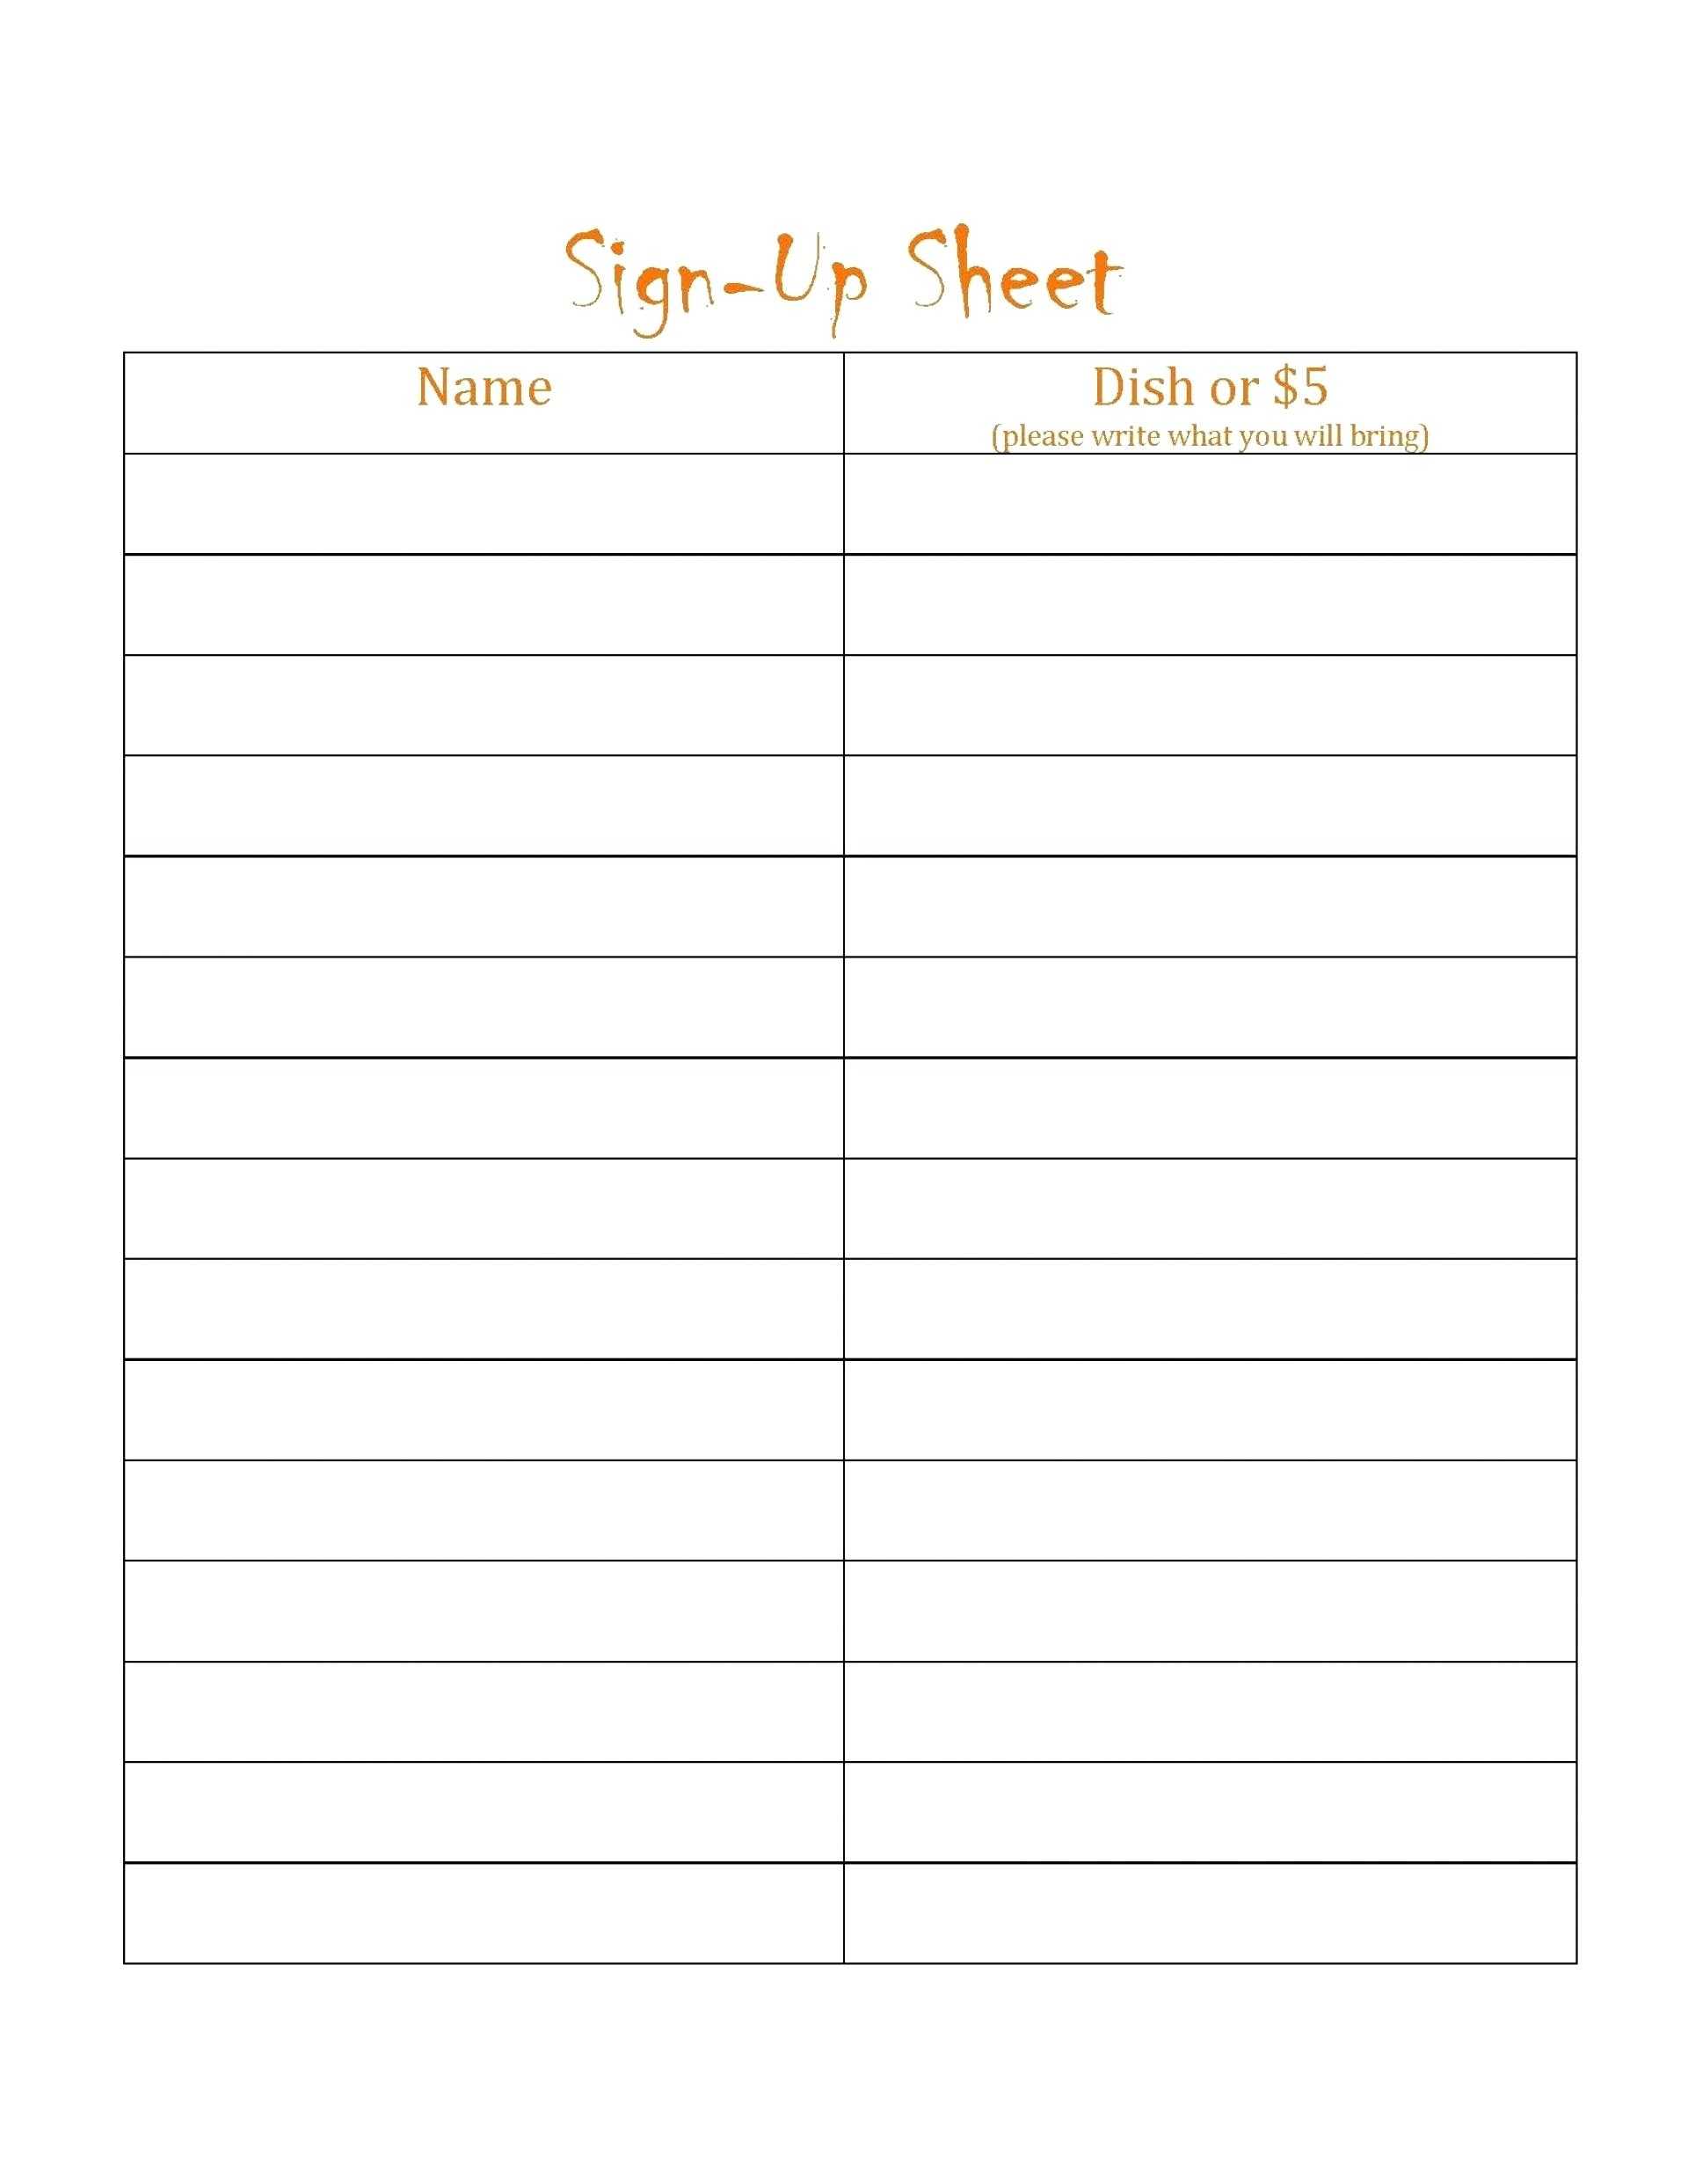 Event Sign Up Sheet Template Authorization Letter For Events With Potluck Signup Sheet Template Word